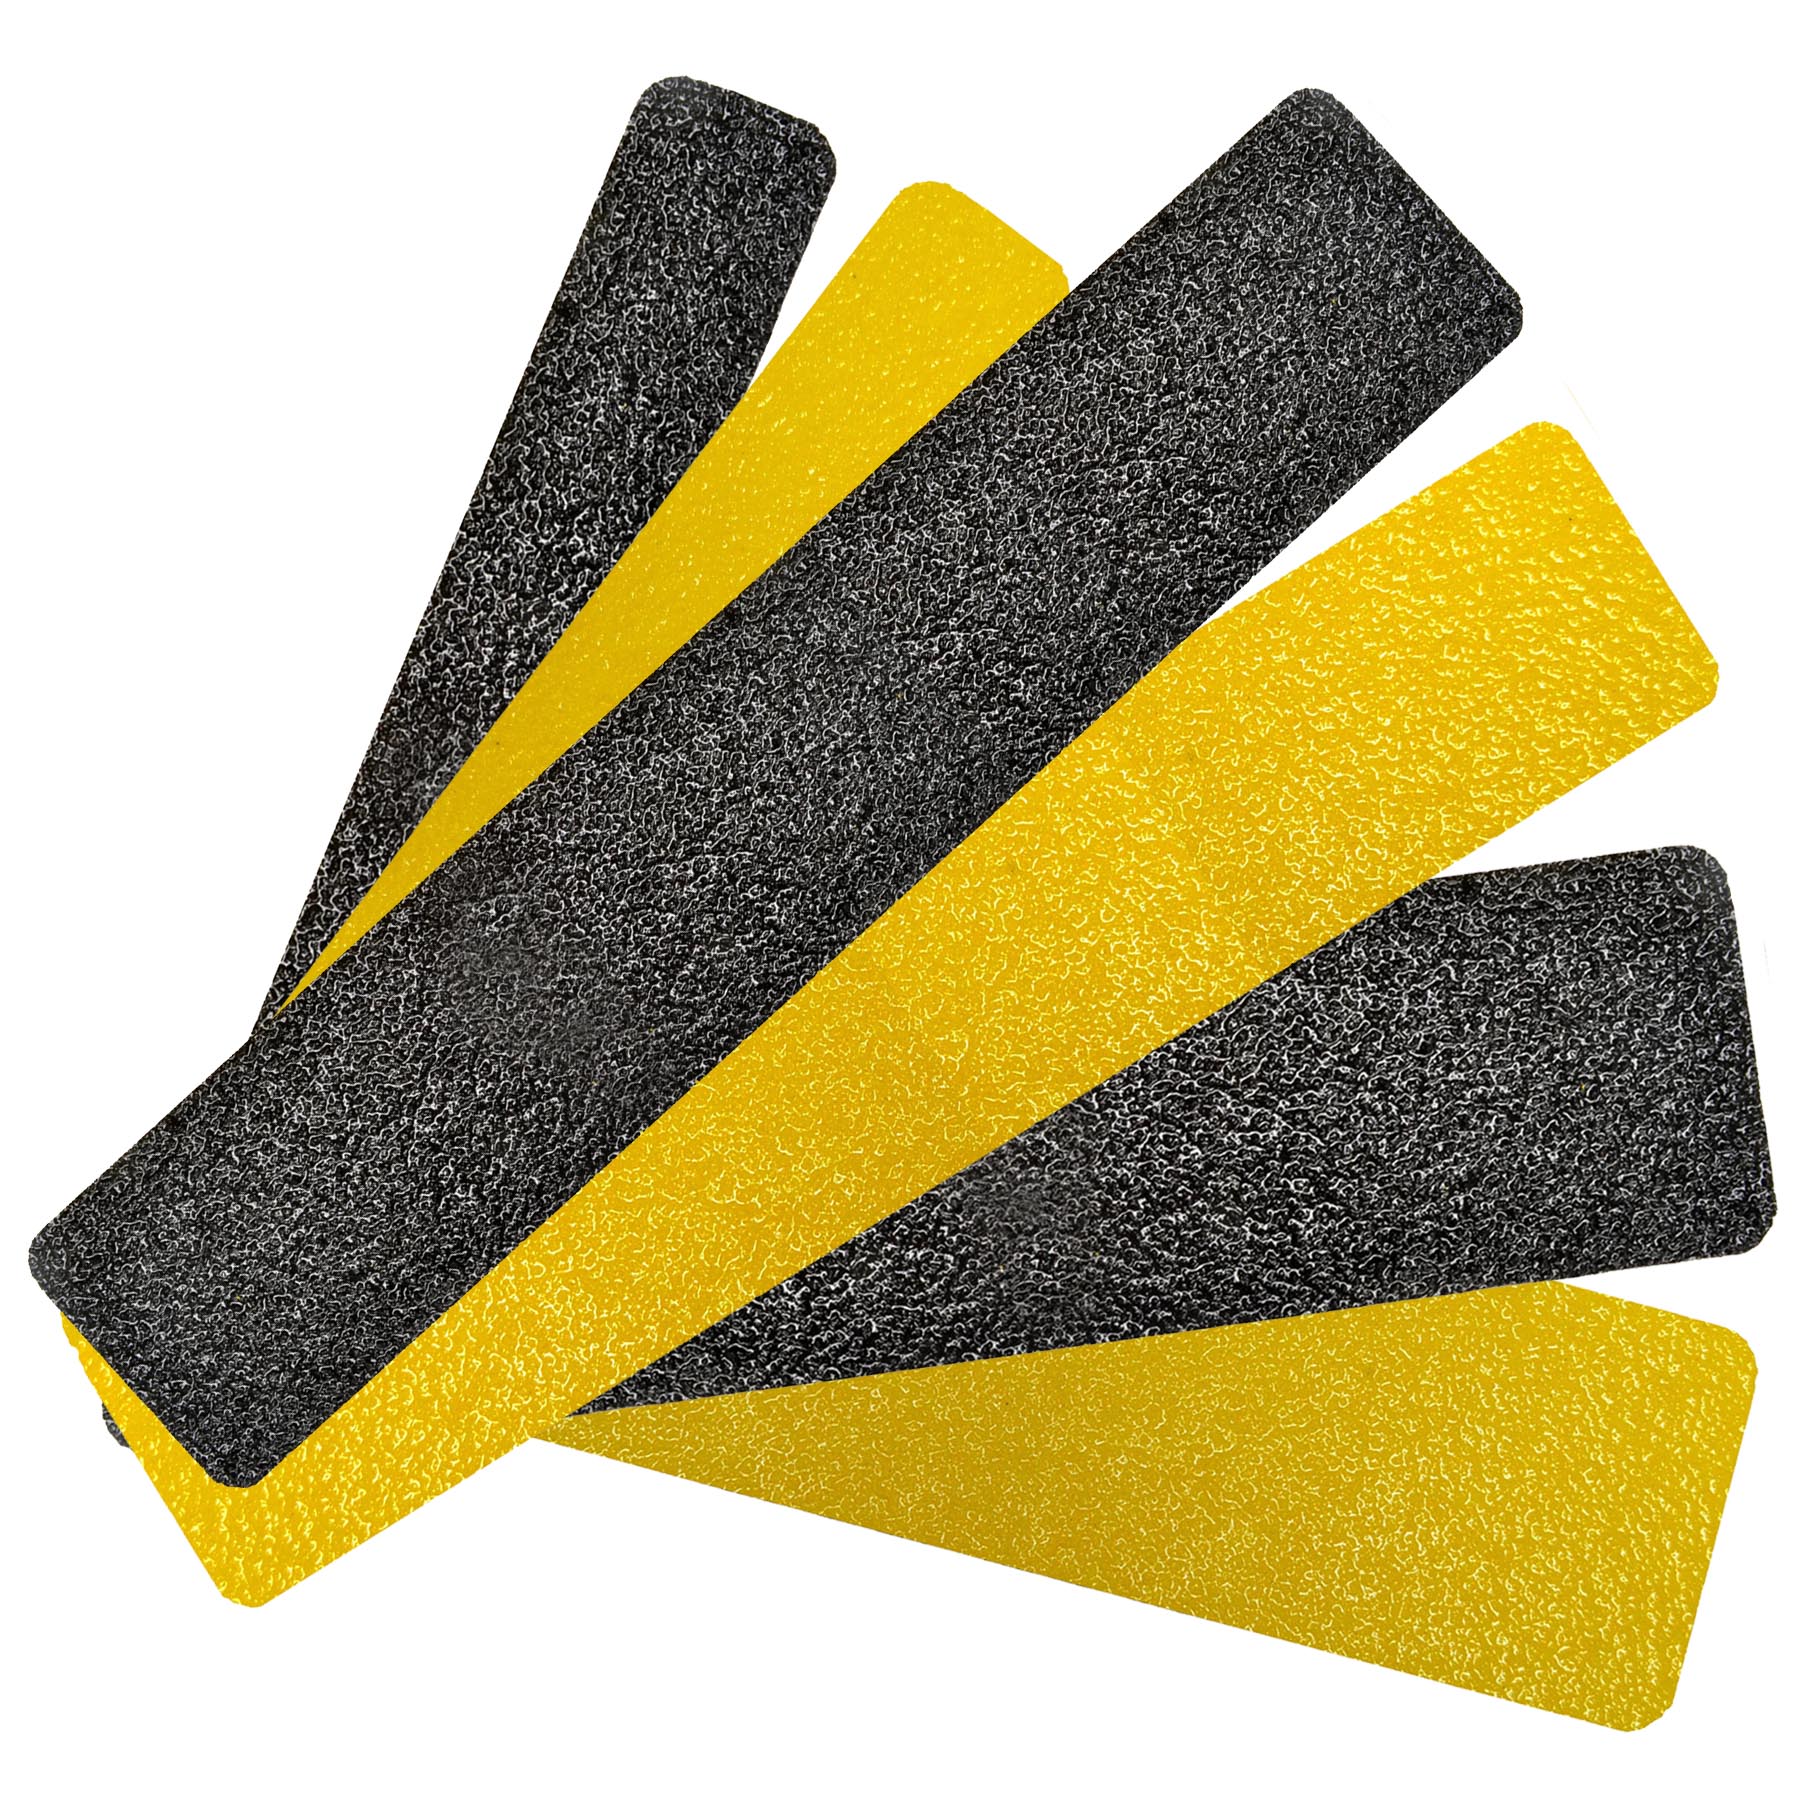 Durable Grip Grit Slip Ground Kid Safety Roar Black Anti Slip Traction Tape 4Inch x 33 Foot Abrasive Adhesive for Stairs Non Slip Indoor Outdoor Use for Stairs